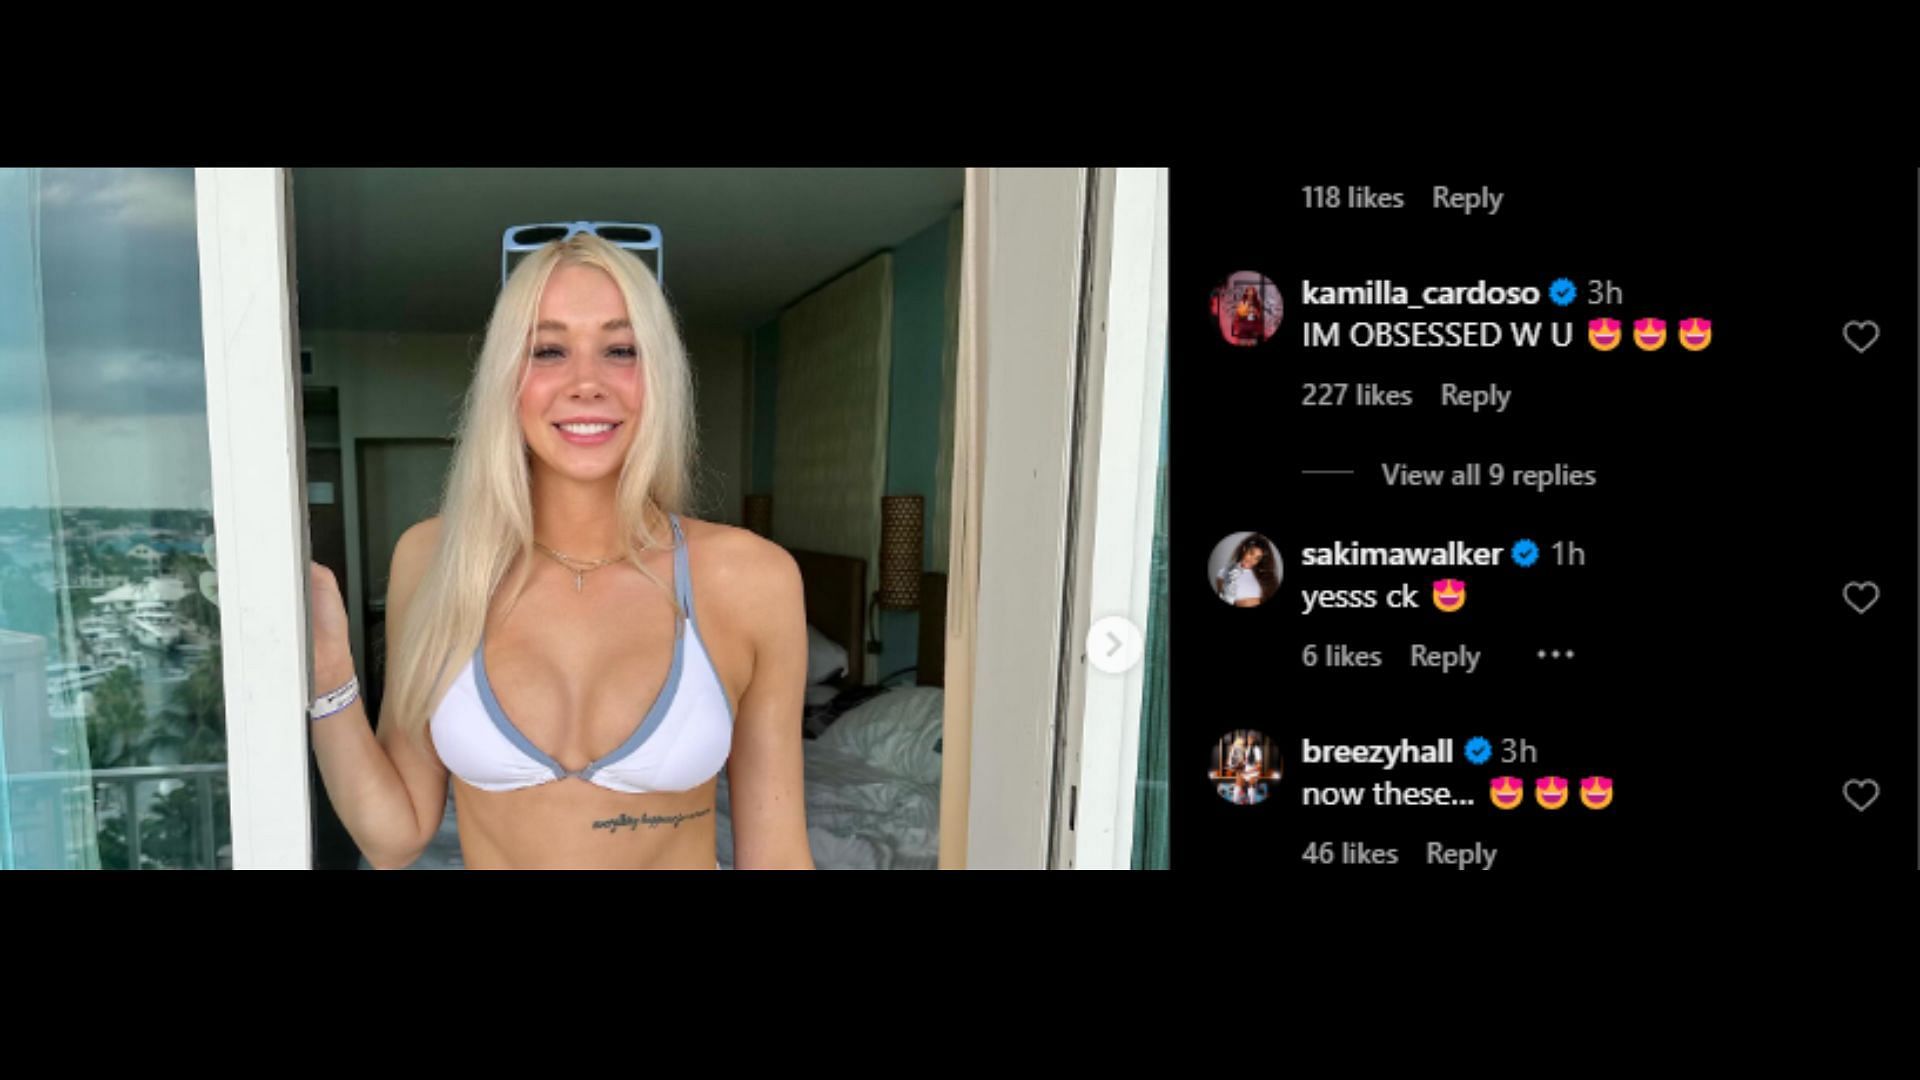 Comments on her post